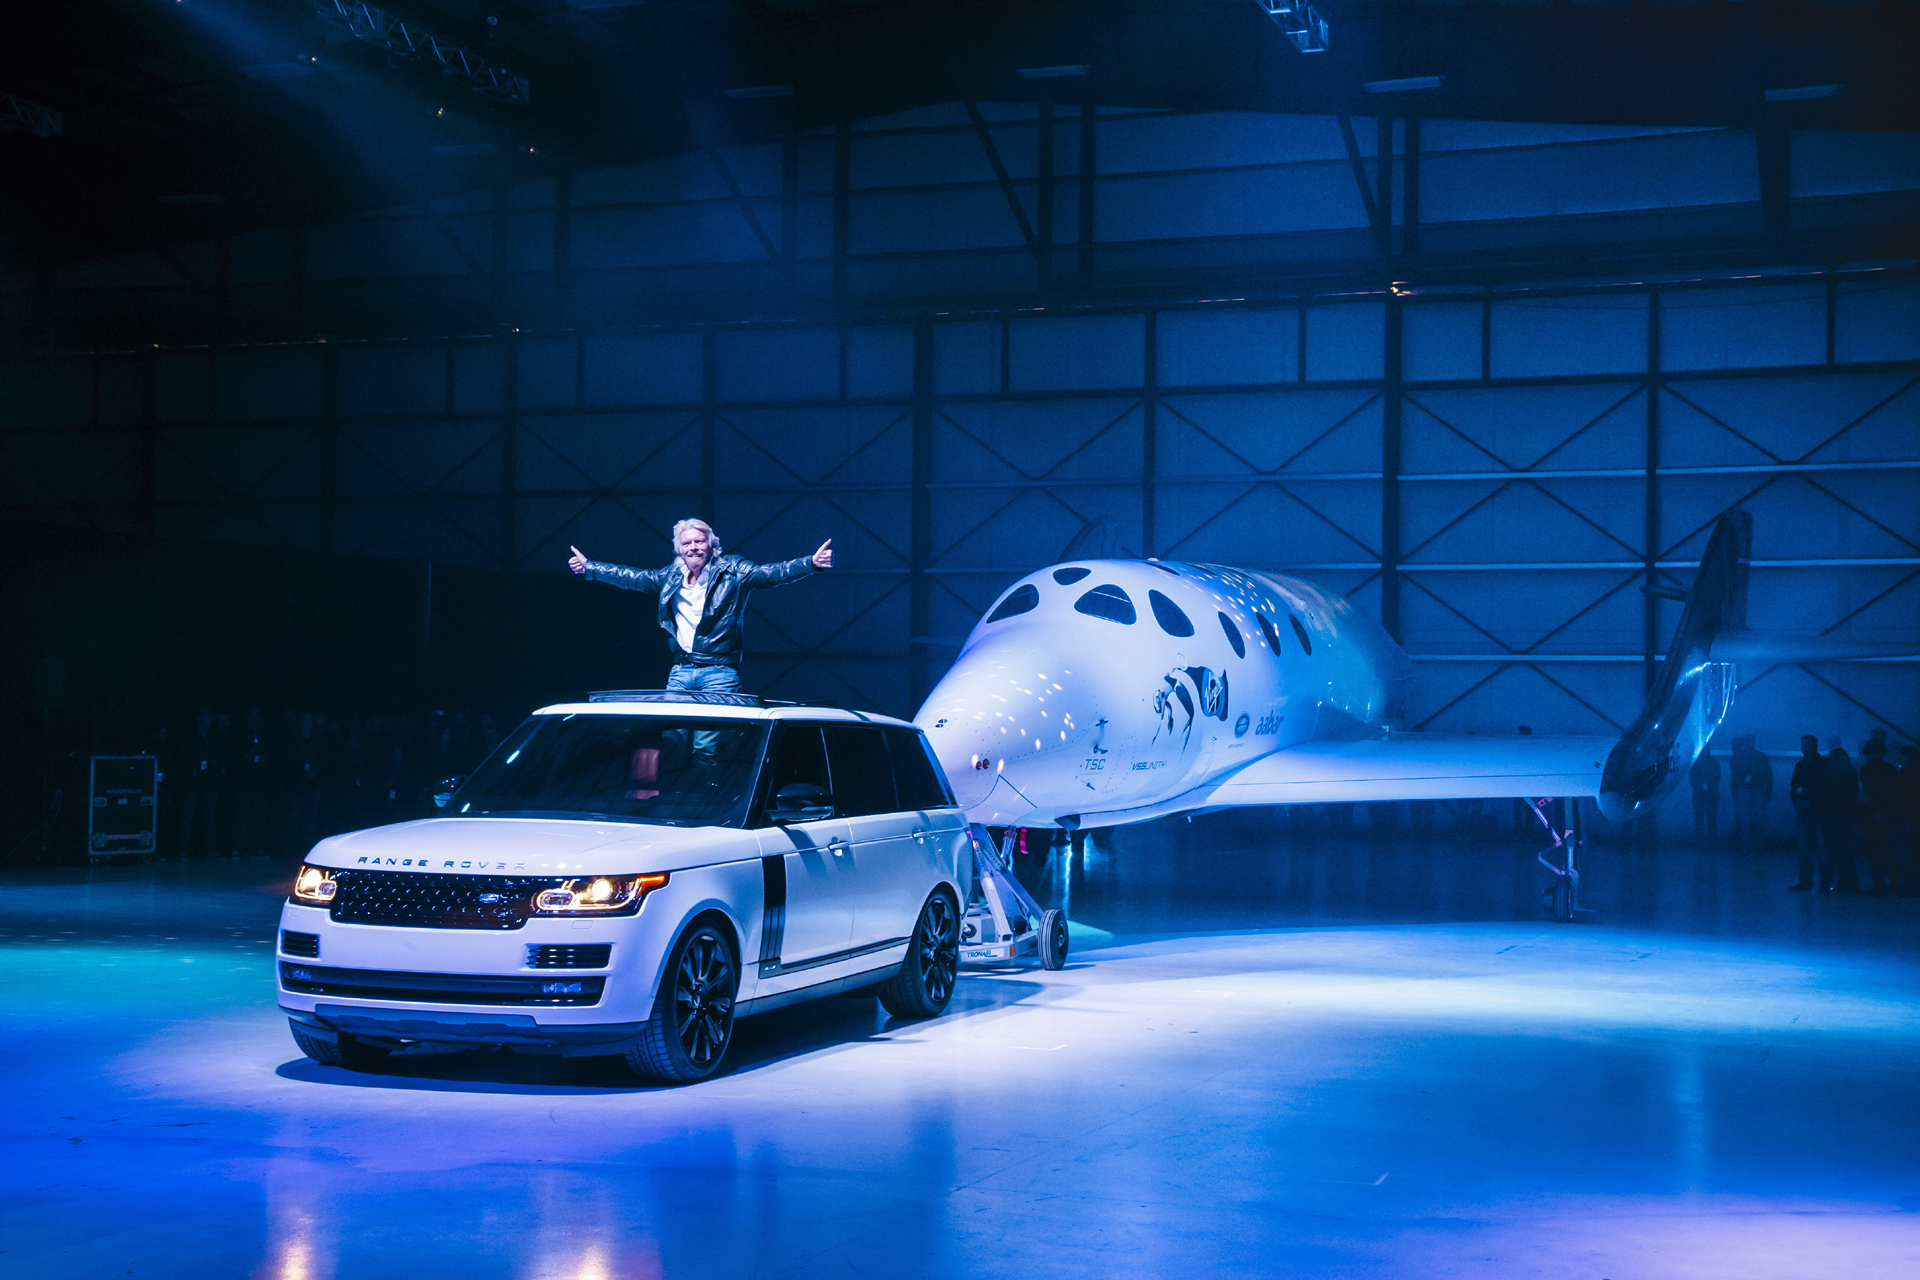 The Range Rover Autobiography towing in VSS Unity, at a special reveal and naming ceremony at Virgin Galactic's Mojave Air and Space Port base in California © Tata Group